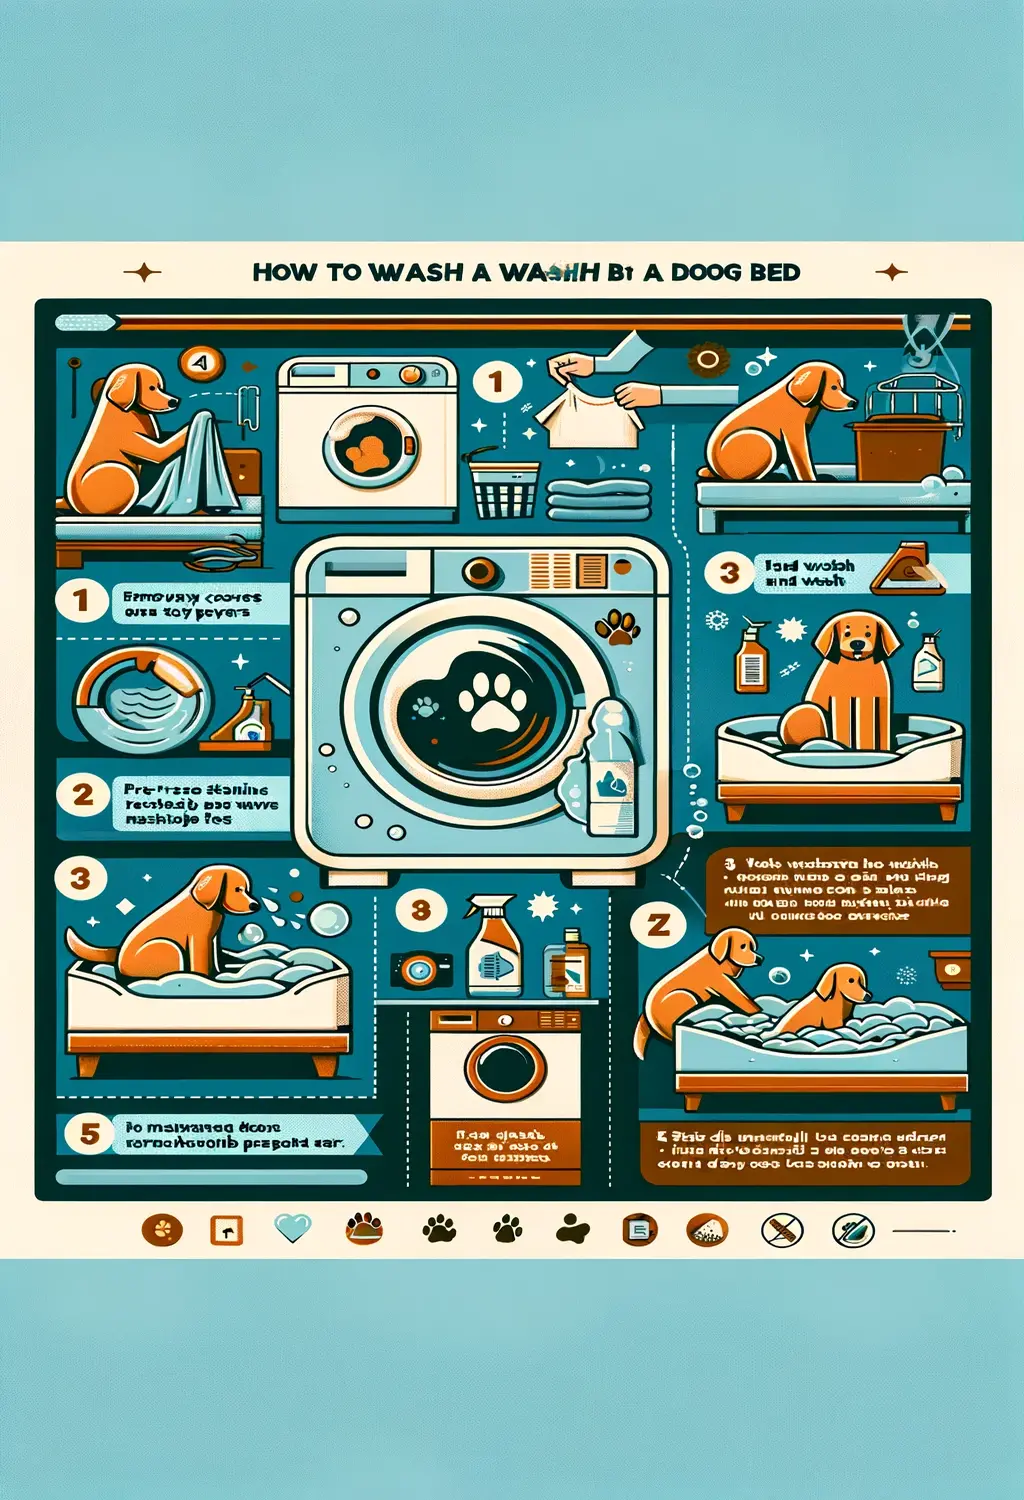 How to Wash a Dog Bed?